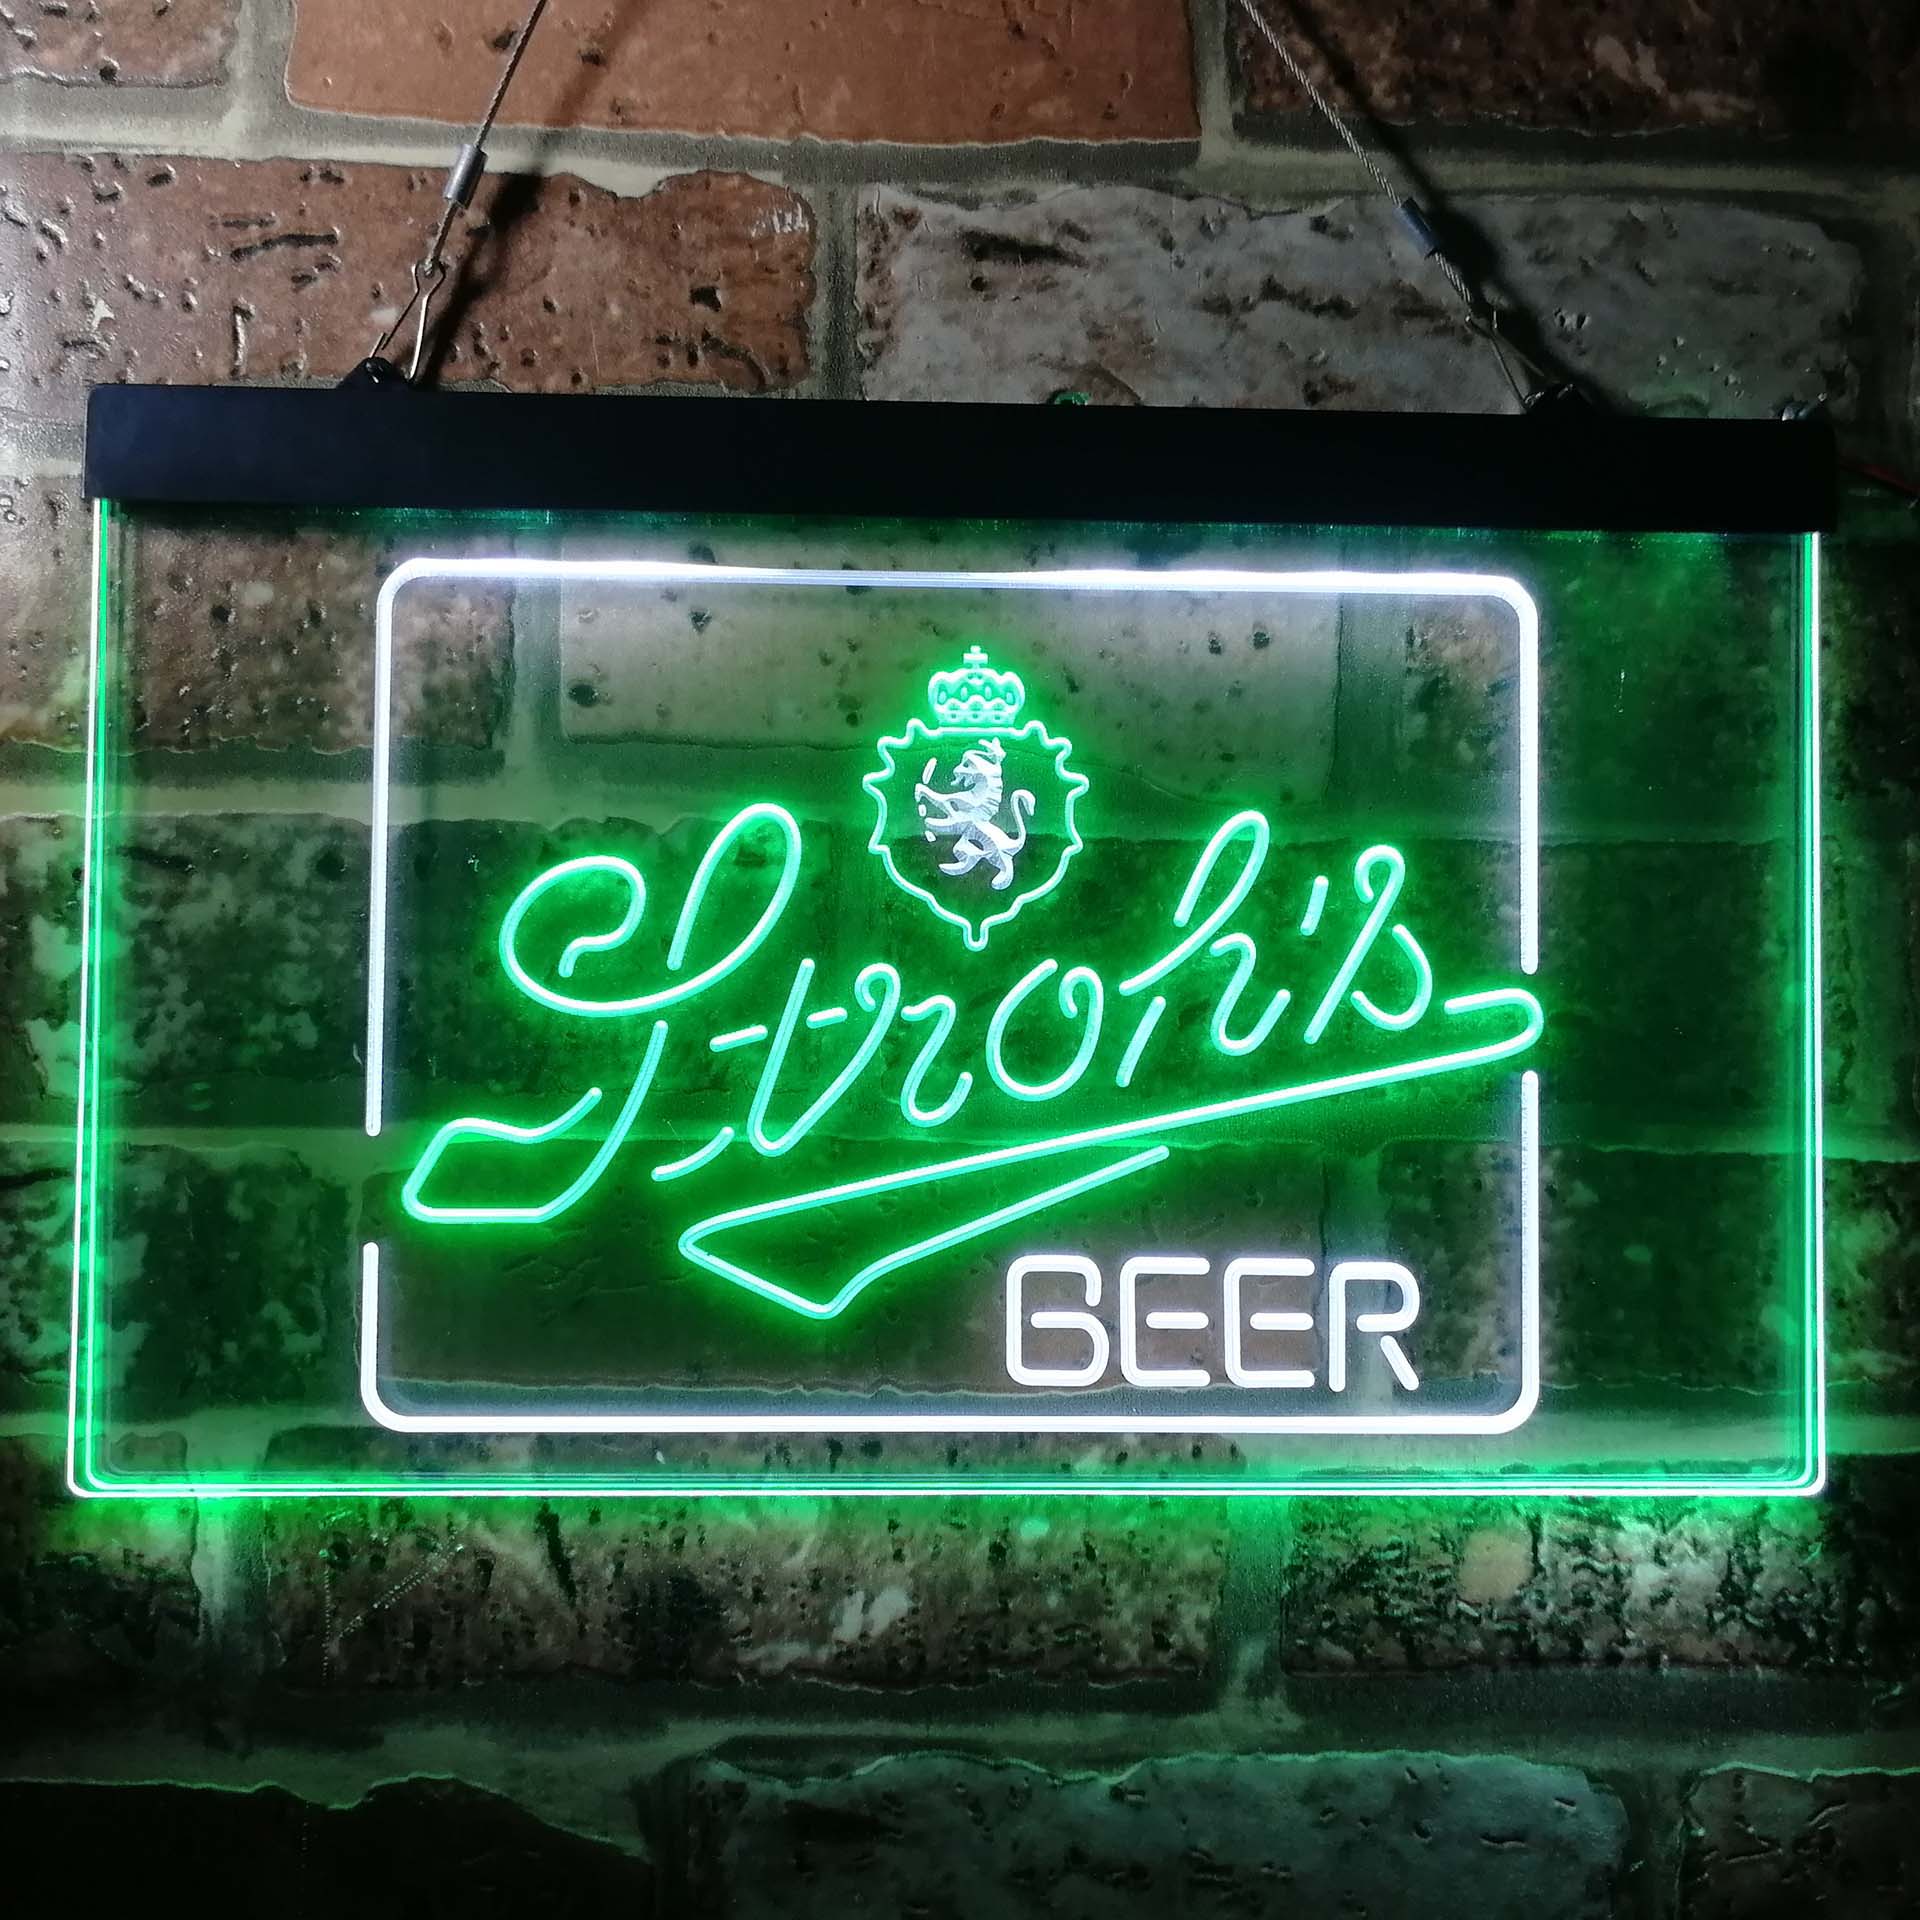 Stroh's Beer Man Cave Bar Neon-Like LED Sign